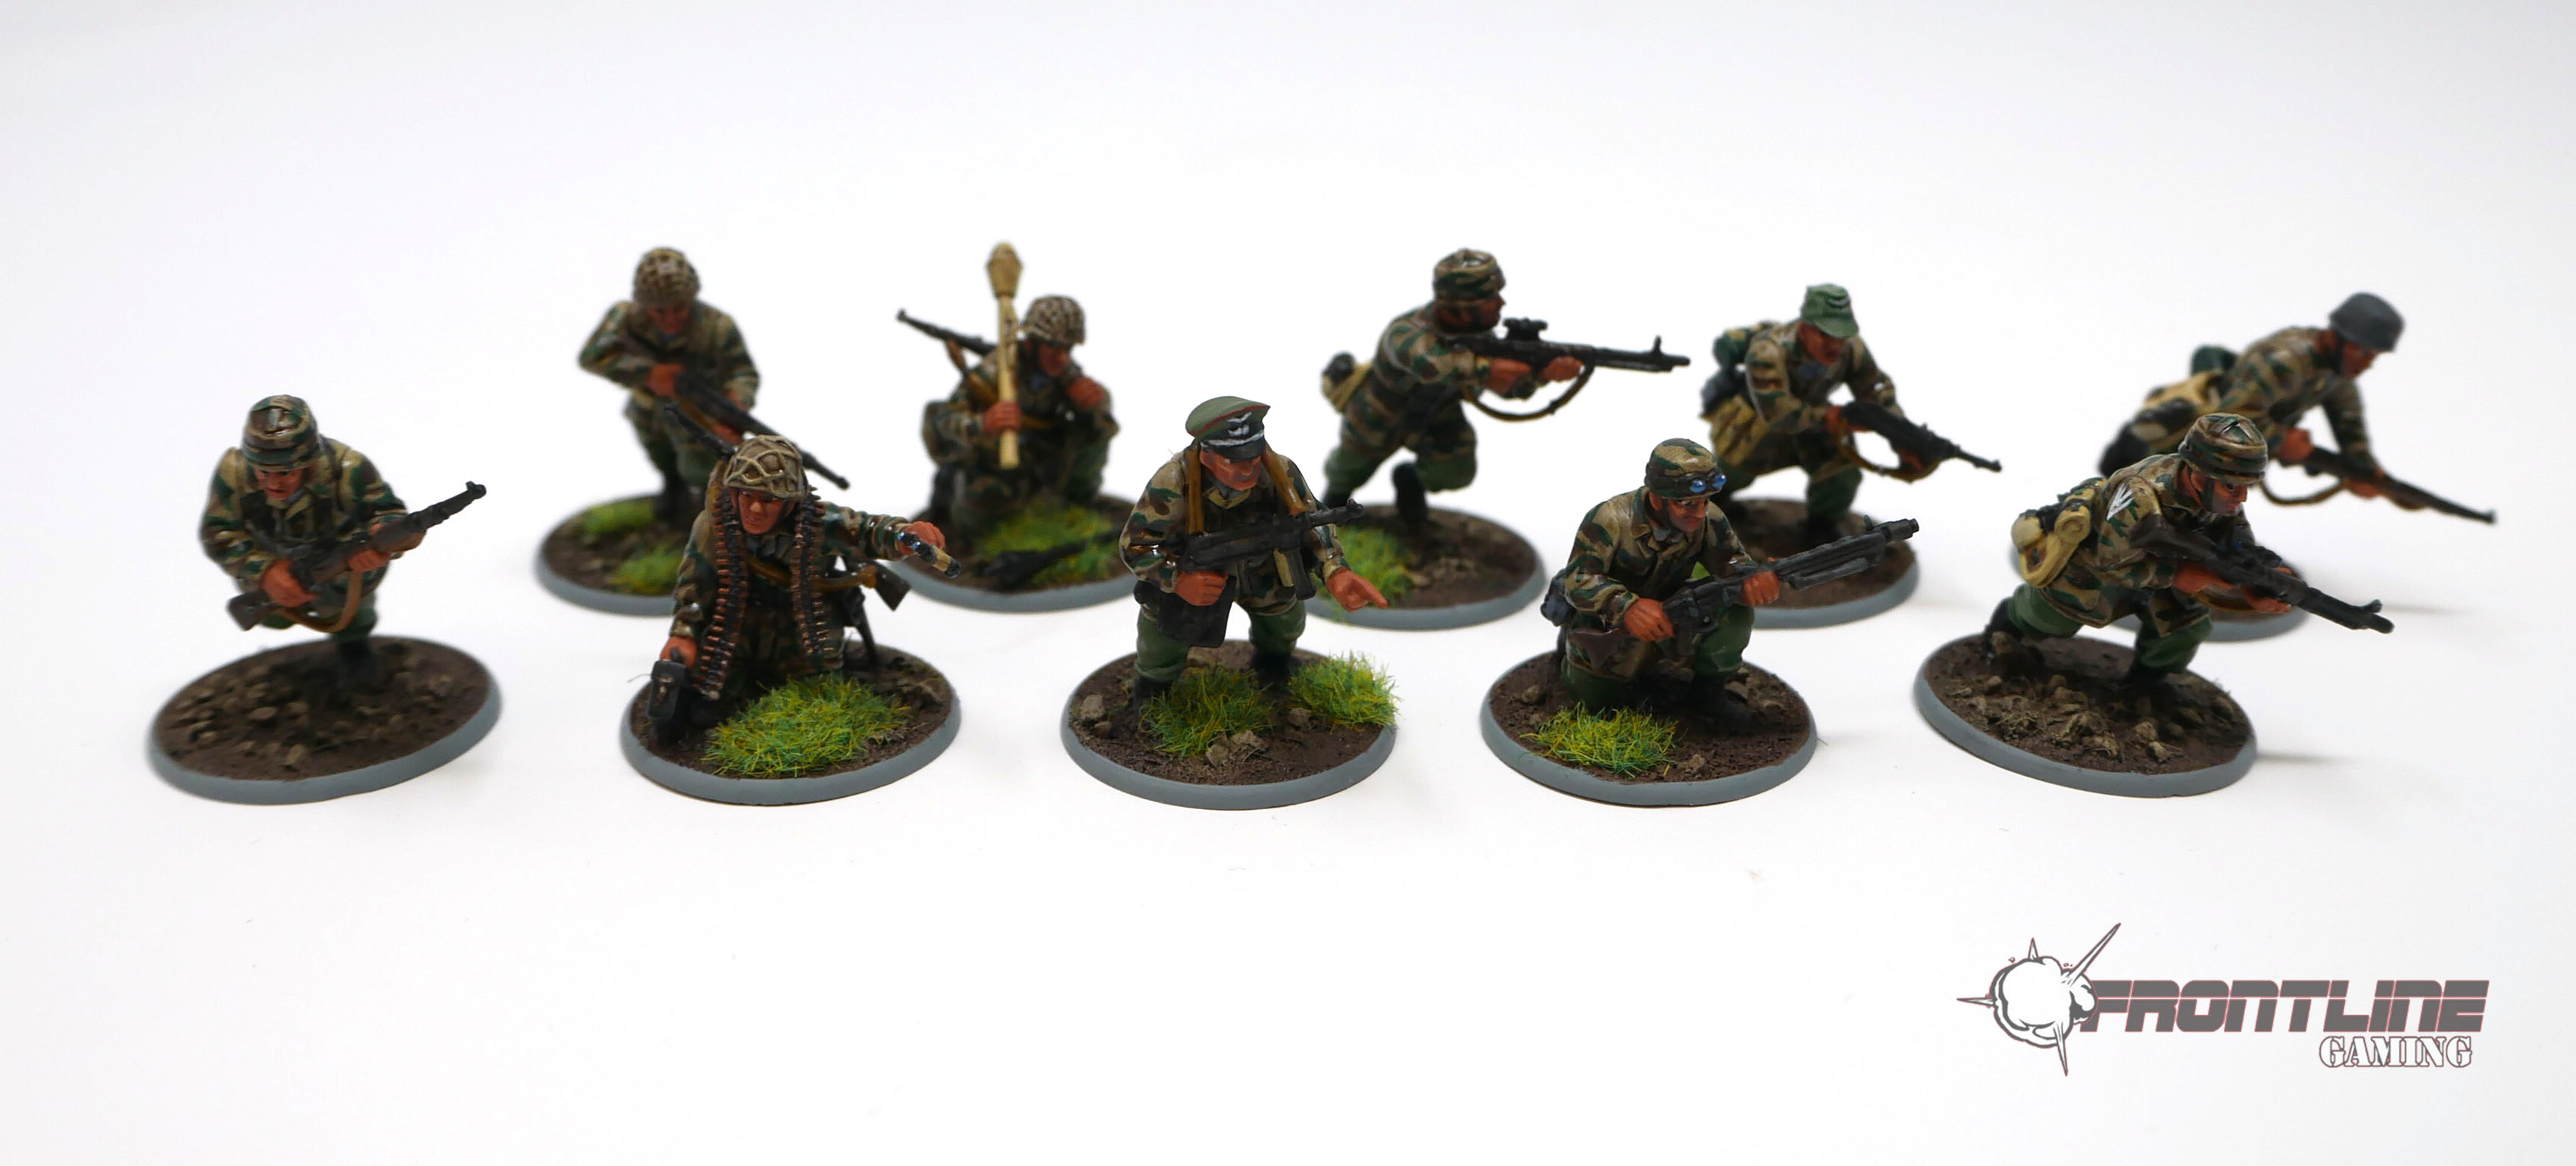 Completed Commission: Bolt Action Germans